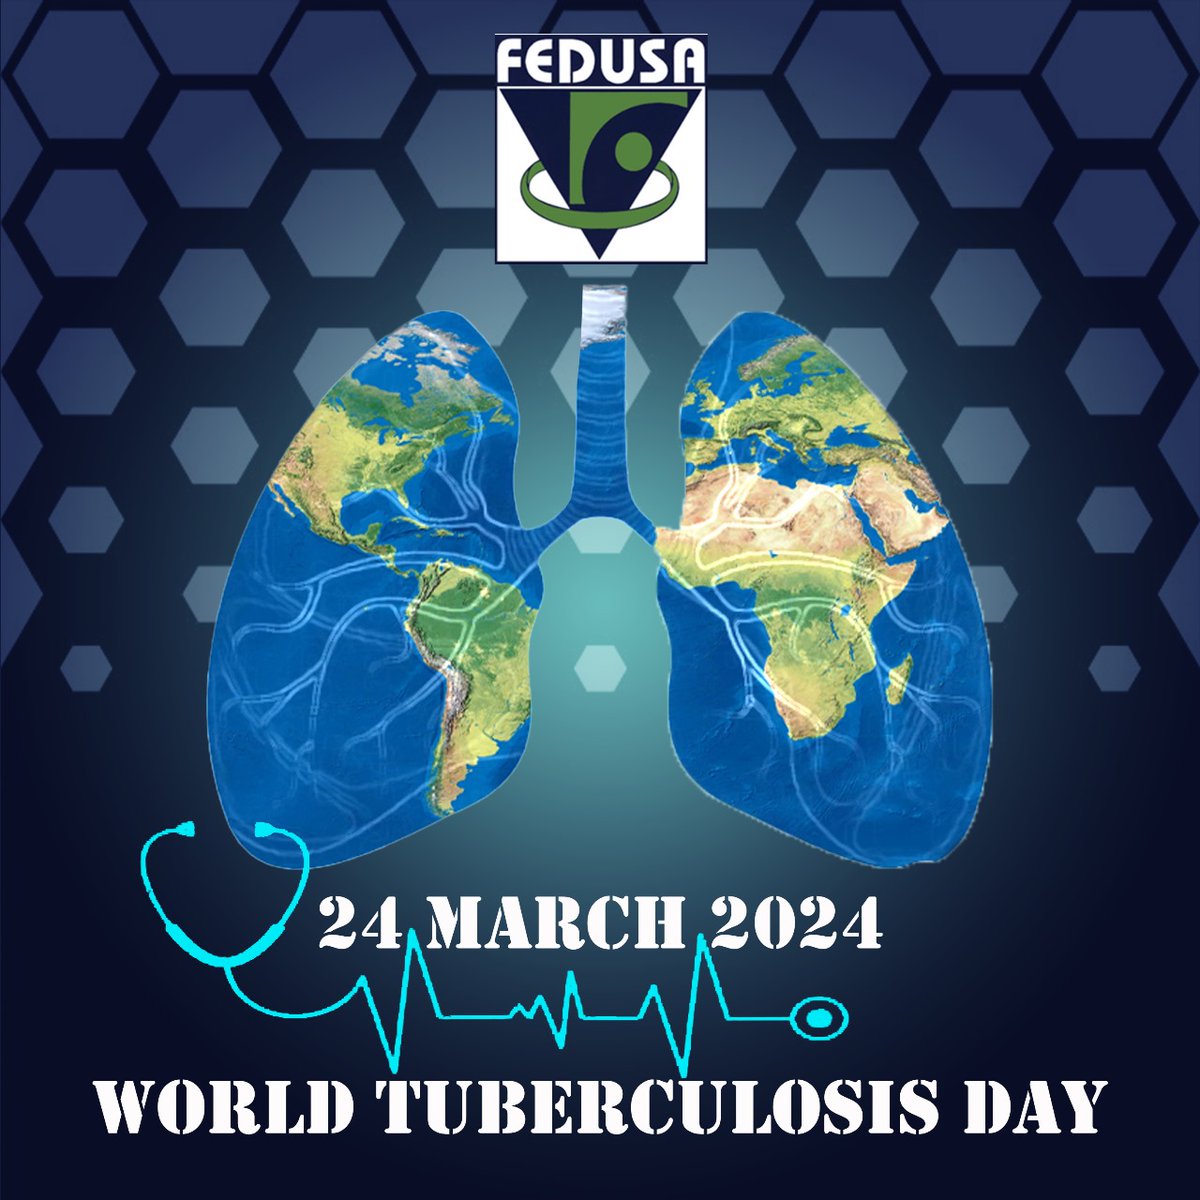 The South African theme for the commemoration of World TB Day 2024 is “Yes! You and I Can End TB”, to encourage individual action to contribute to the national effort against TB. #TB #Tuberculosis #WorldTBDay @unionofchoice @NAPTOSA_TEACH @HospersaOnline